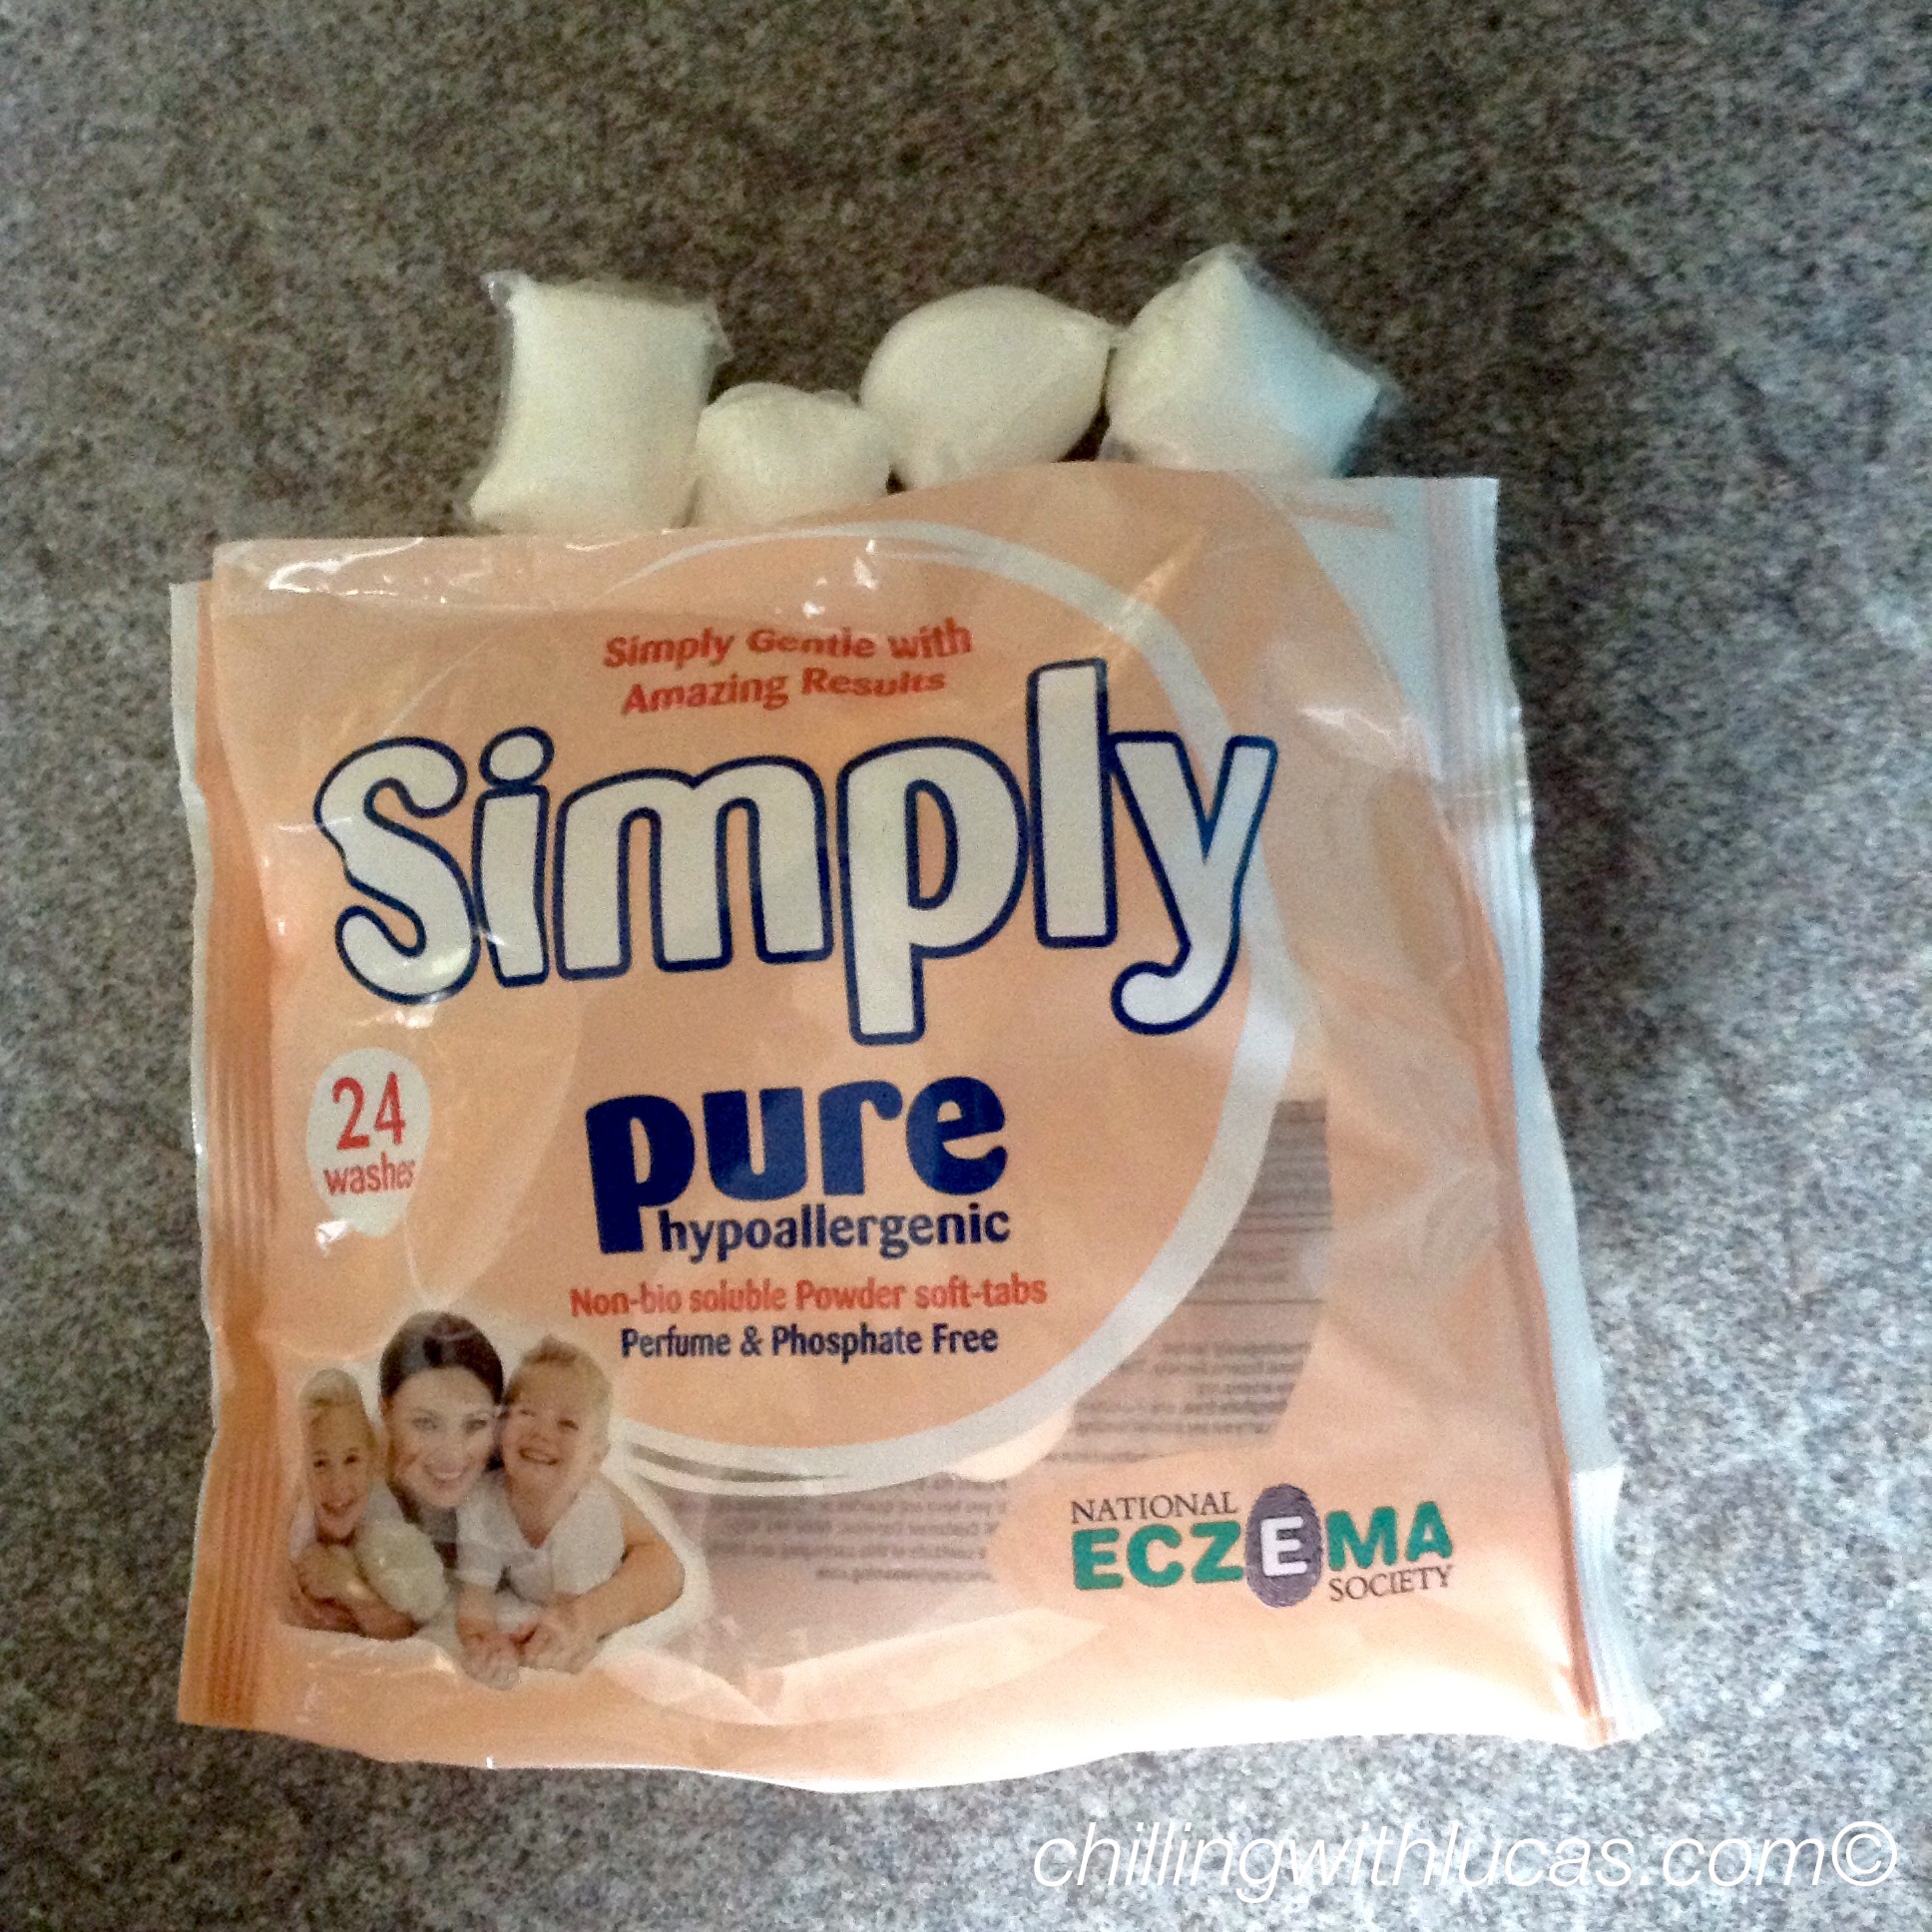 Simply pure hypoallergenic washing tab